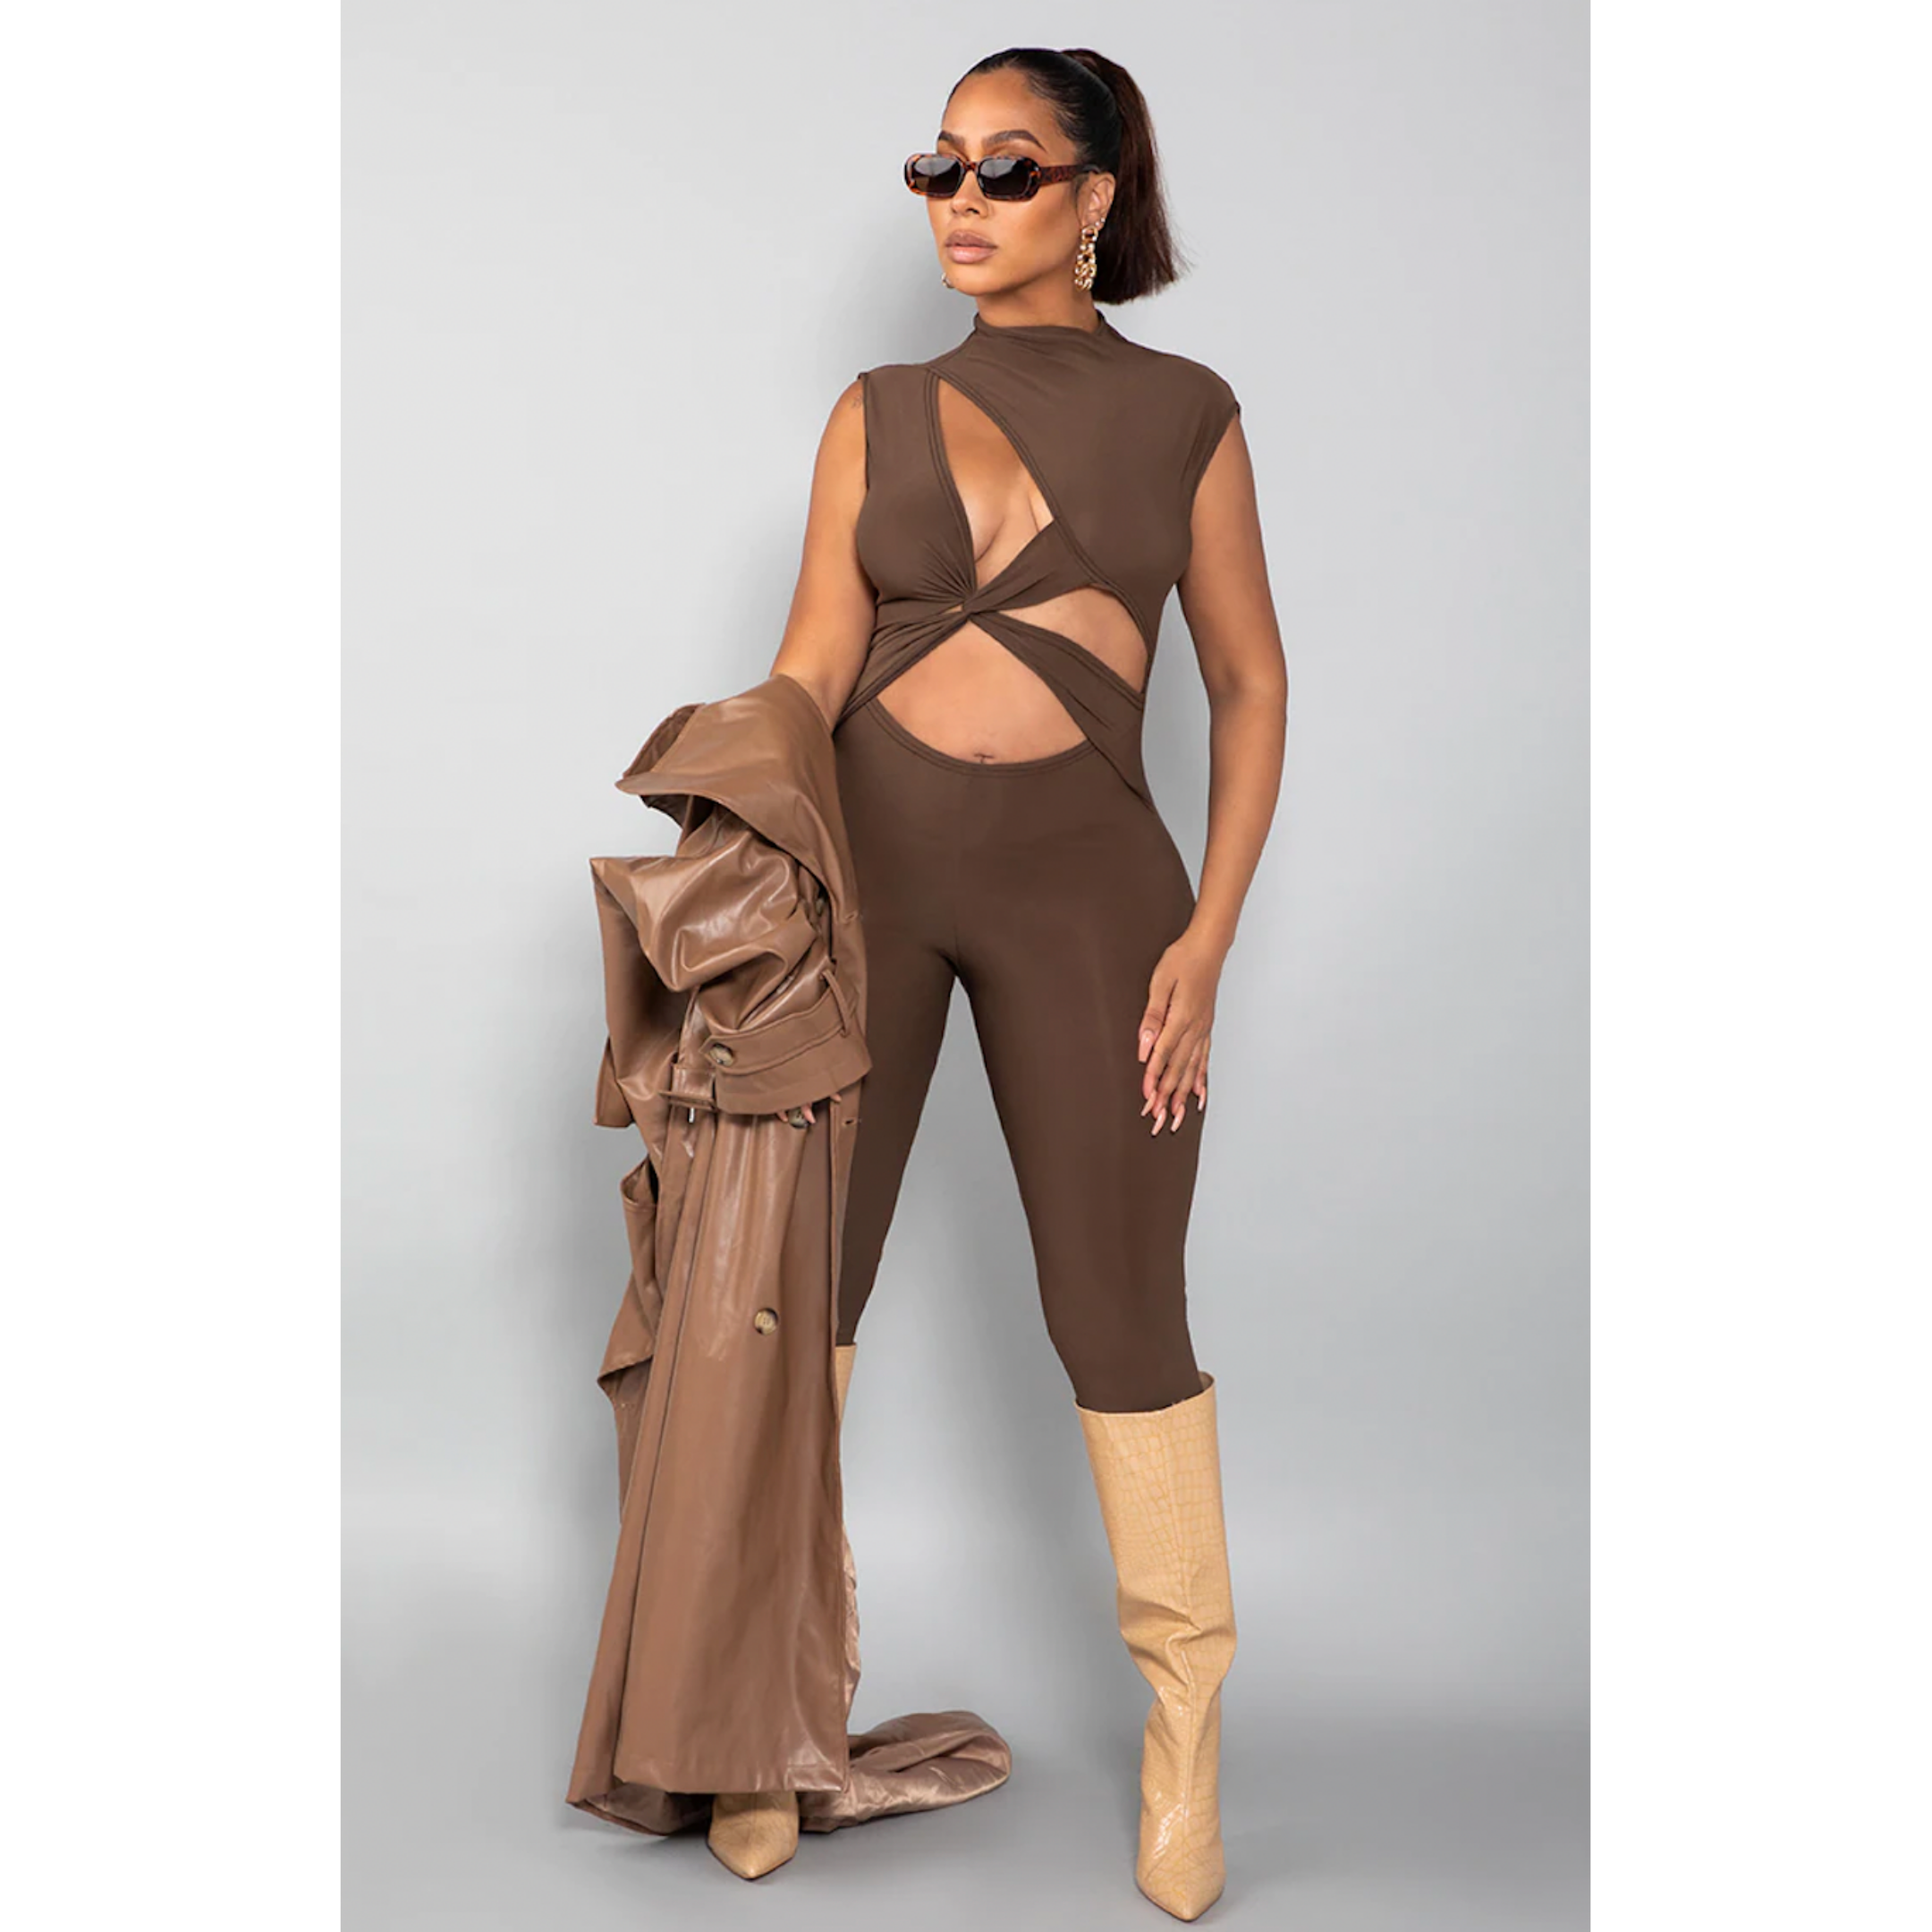 LaLa's Second PrettyLittleThing Drop Is Here, And The Styles Are So Trend-Forward